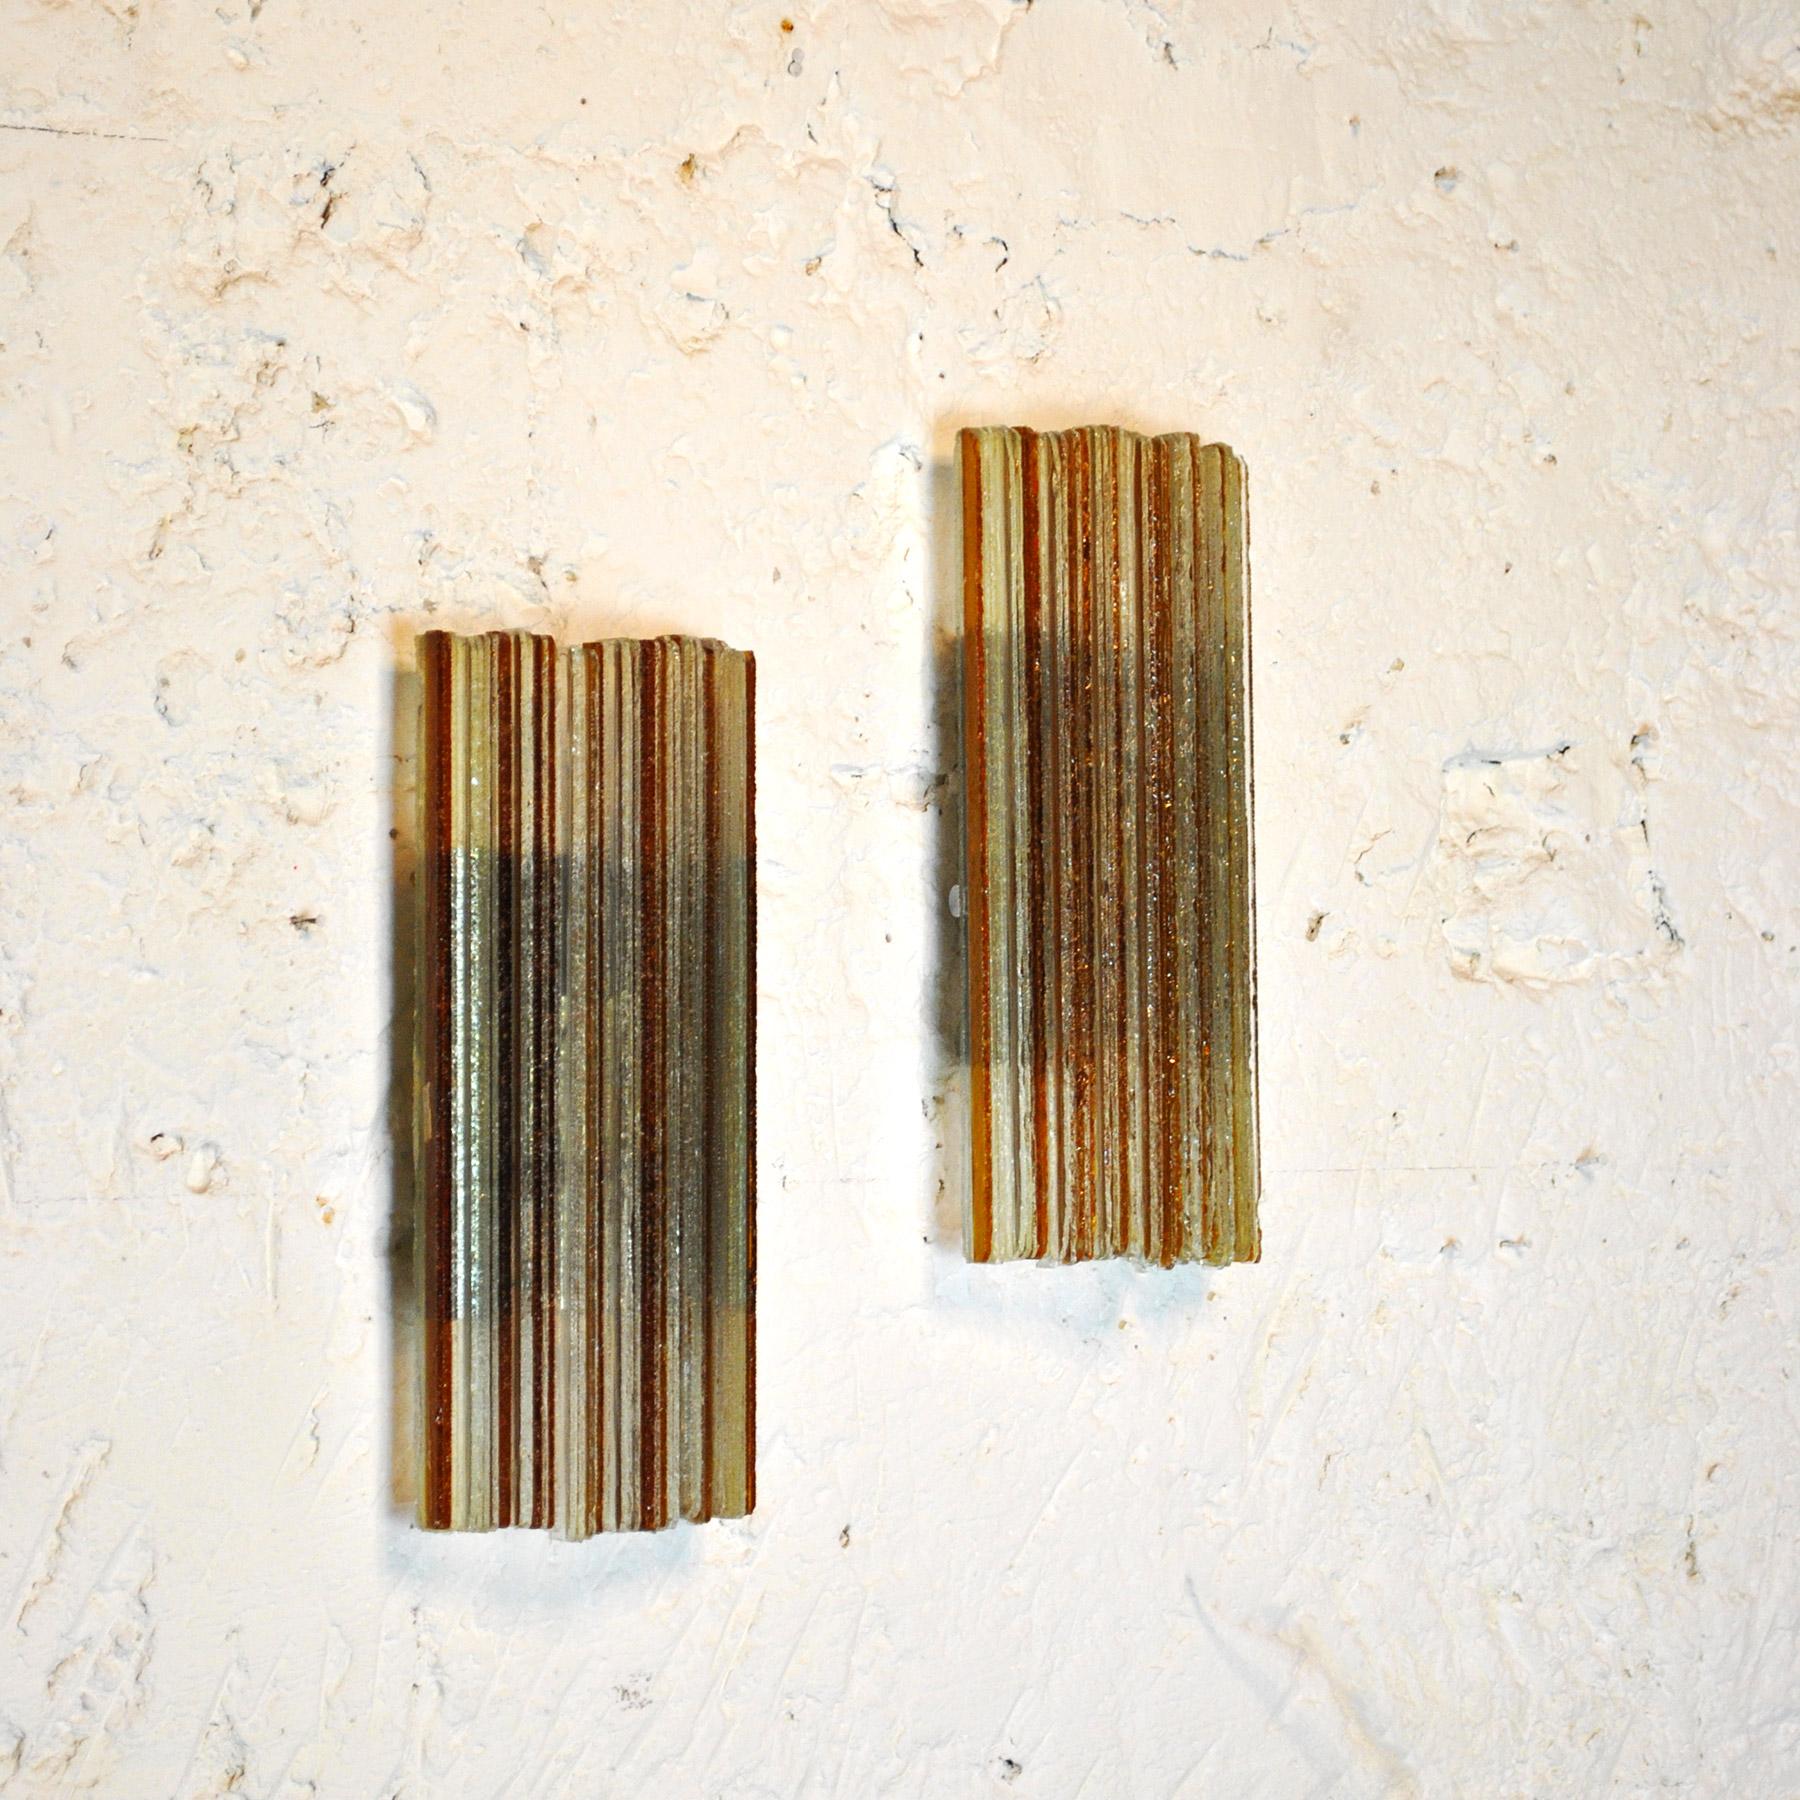 Glass Poliarte Italian Midcentury Pair of Sconces For Sale